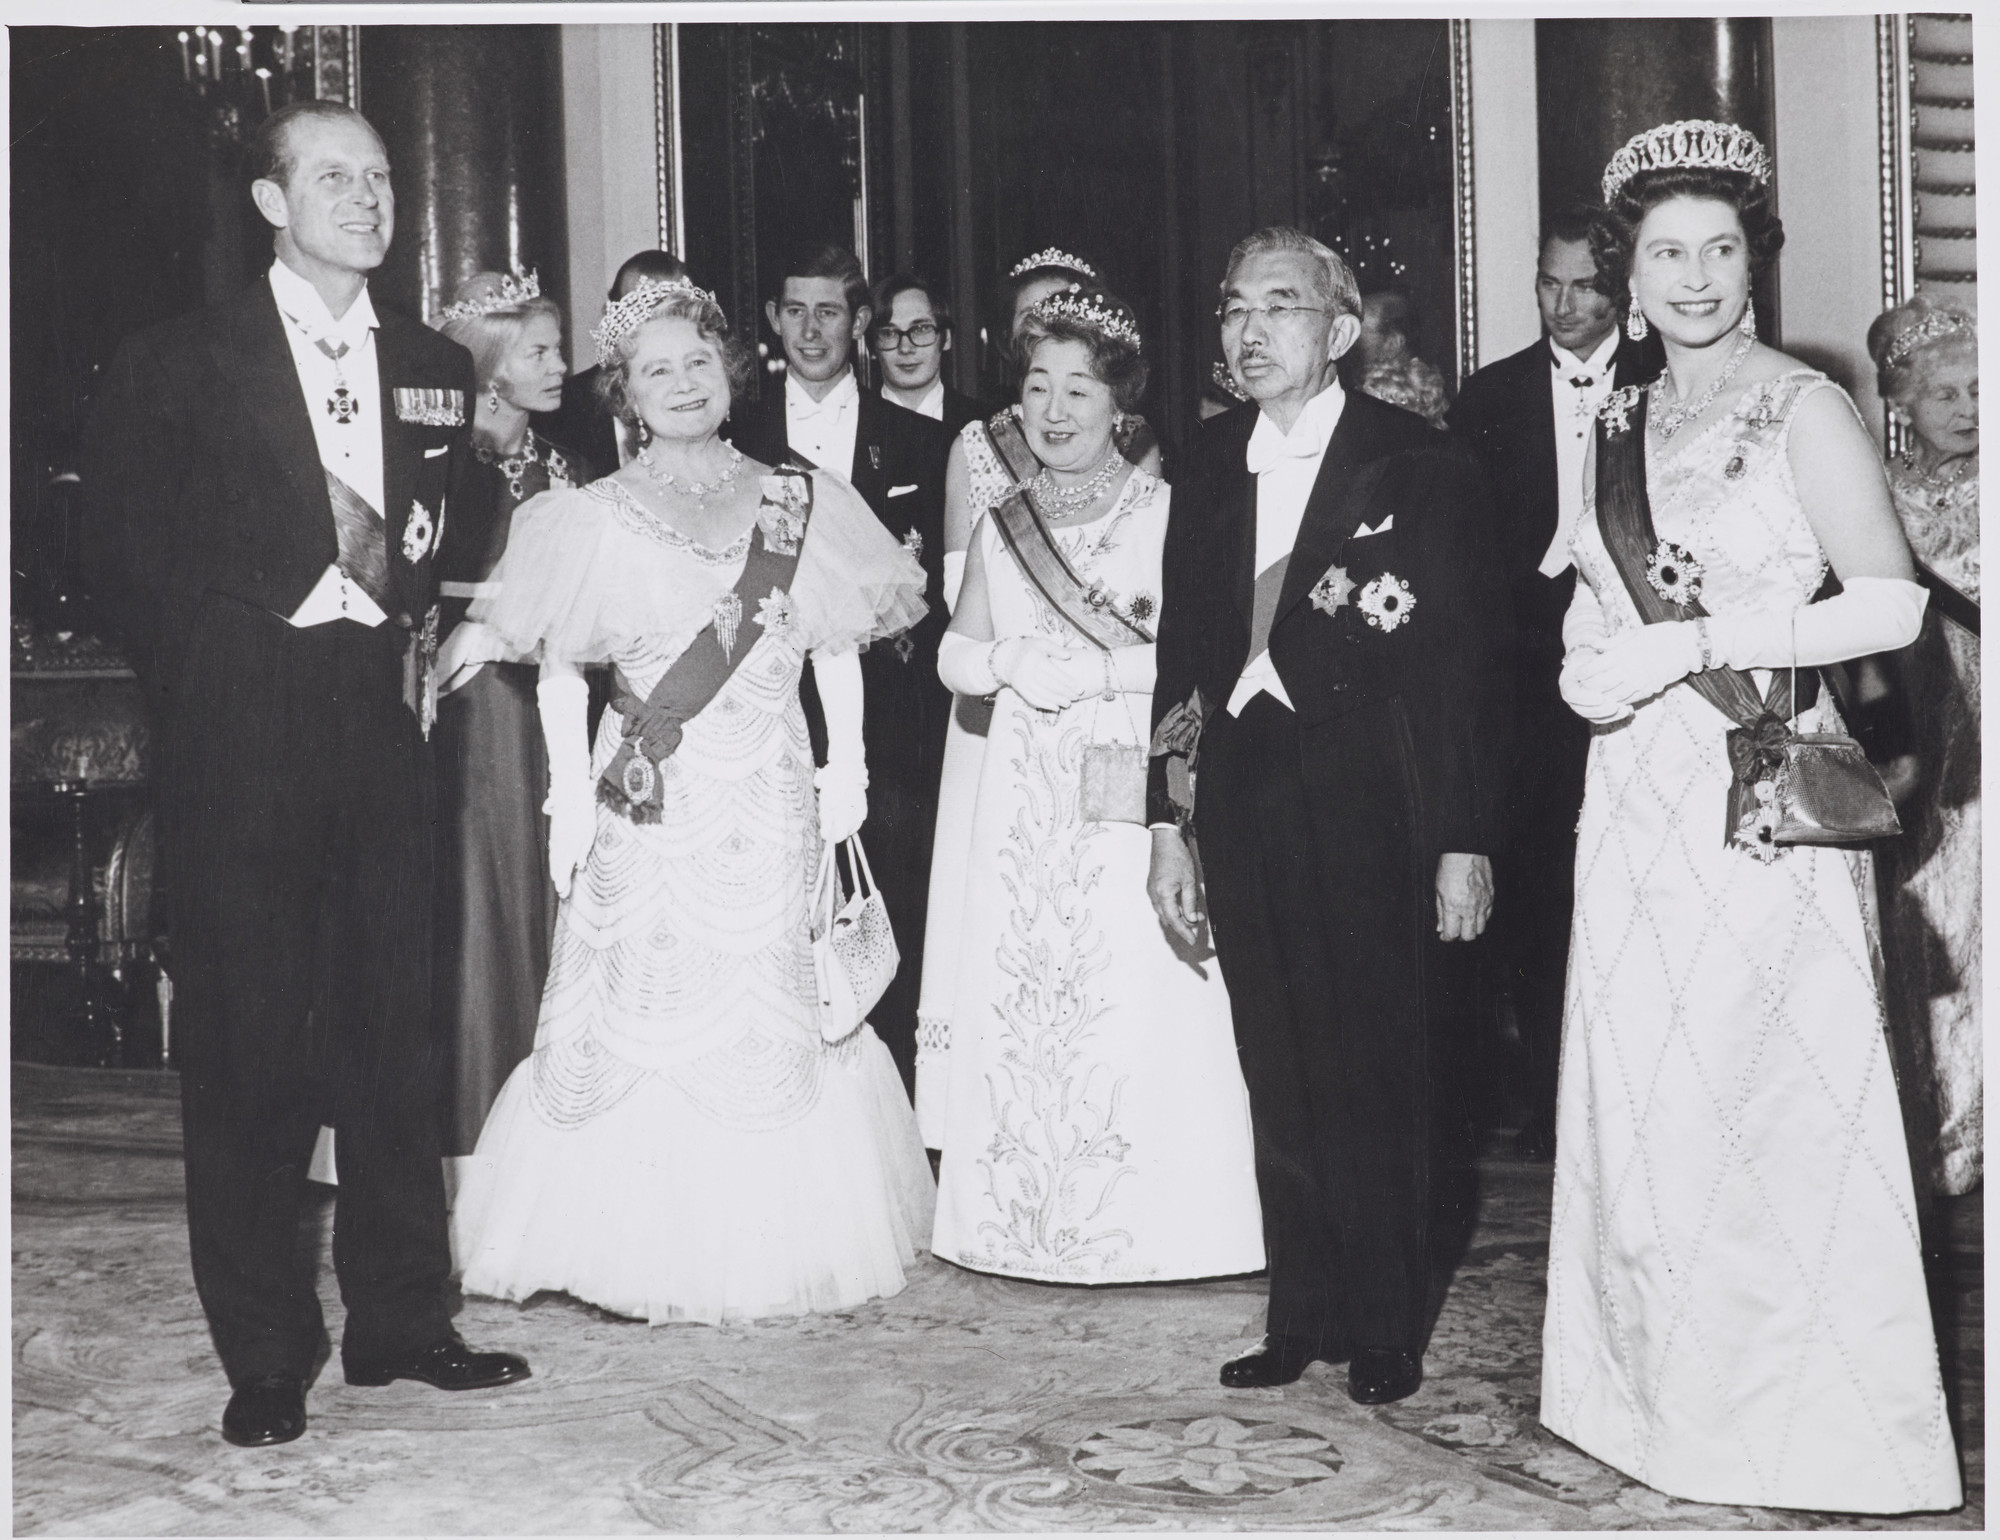 Black and white photograph of Prince Philip, the Queen Mother, Empress Nagako of Japan, Emperor Hirohito of Japan and Queen Elizabeth II